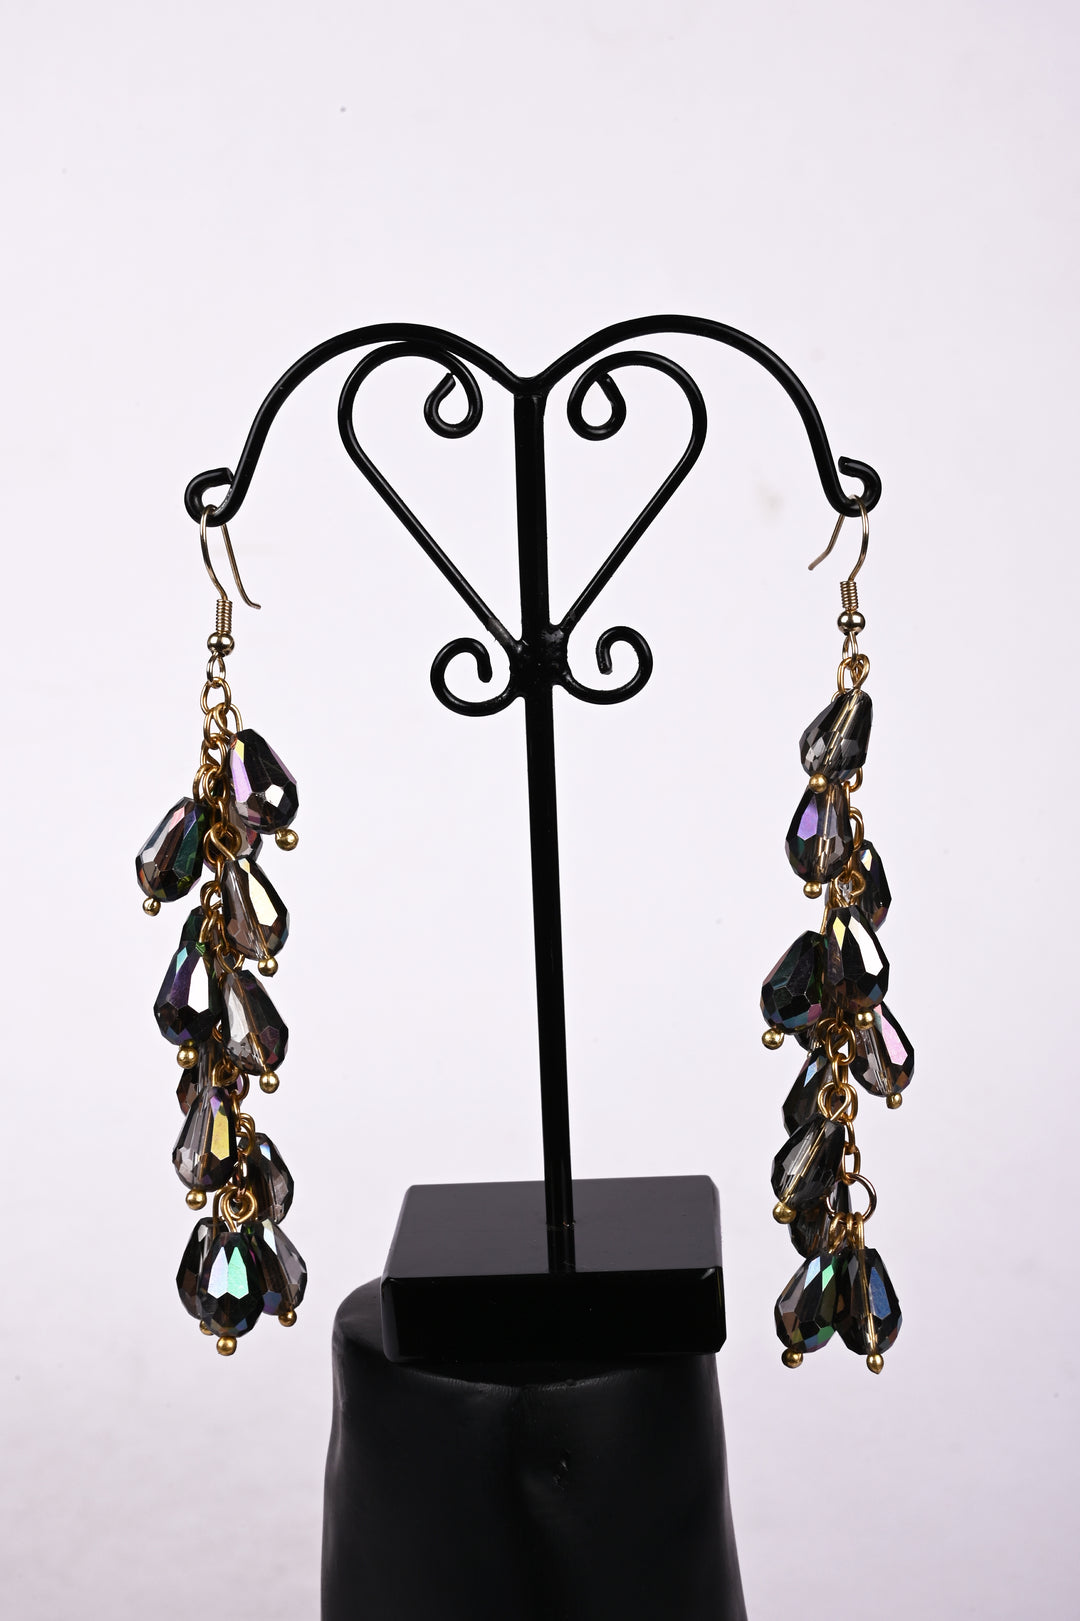 Gold Polished Metal Chain Earring Styled With Multi Layered Teardrop Shaped Glass Beads